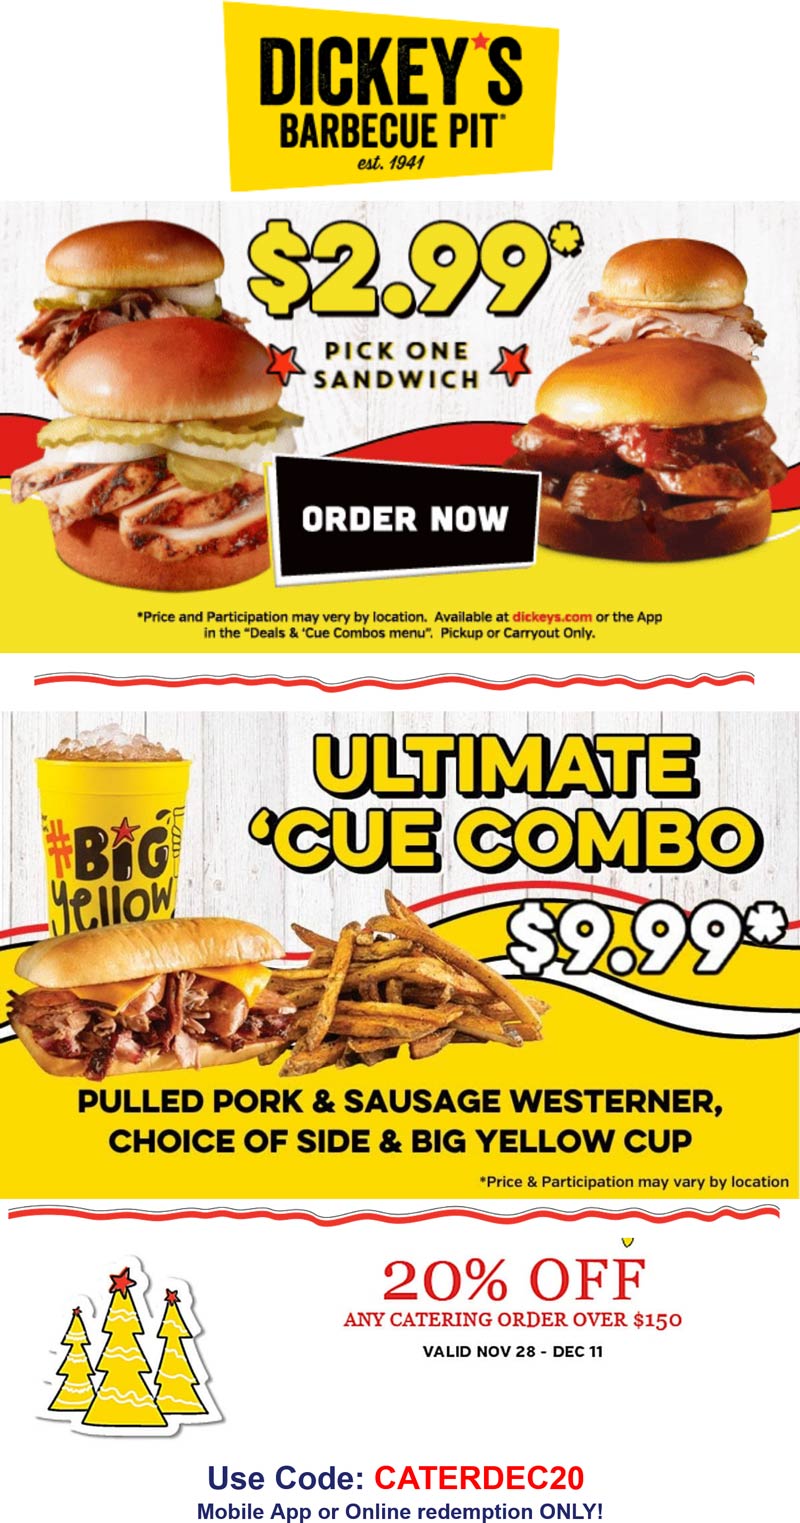 Dickeys Barbecue Pit restaurants Coupon  $3 sandwiches at Dickeys Barbecue Pit #dickeysbarbecuepit 